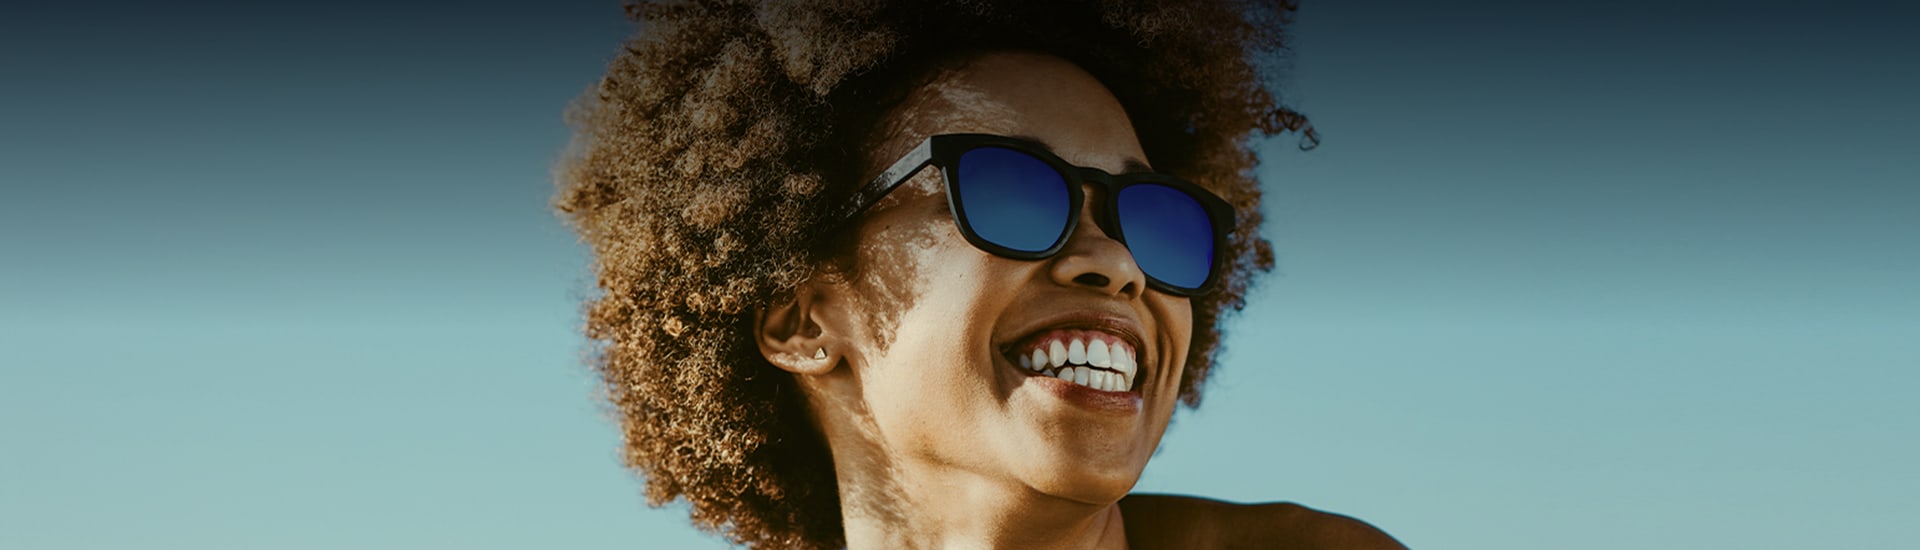 woman with curly hair smiling and wearing sunglasses against a blue sky